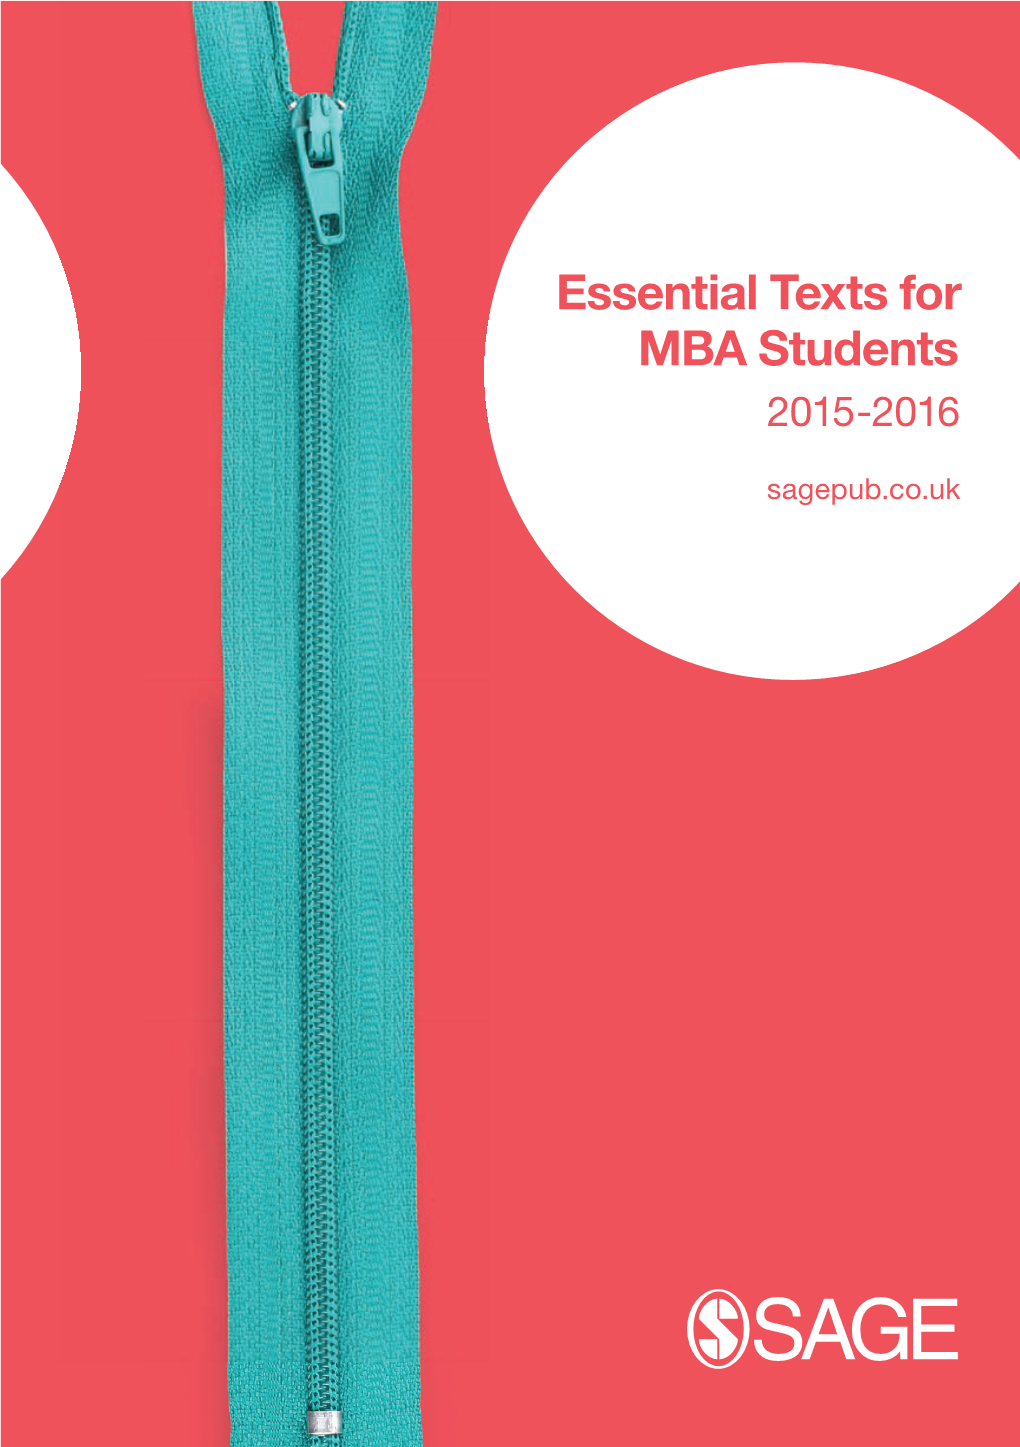 Essential Texts for MBA Students 2015-2016